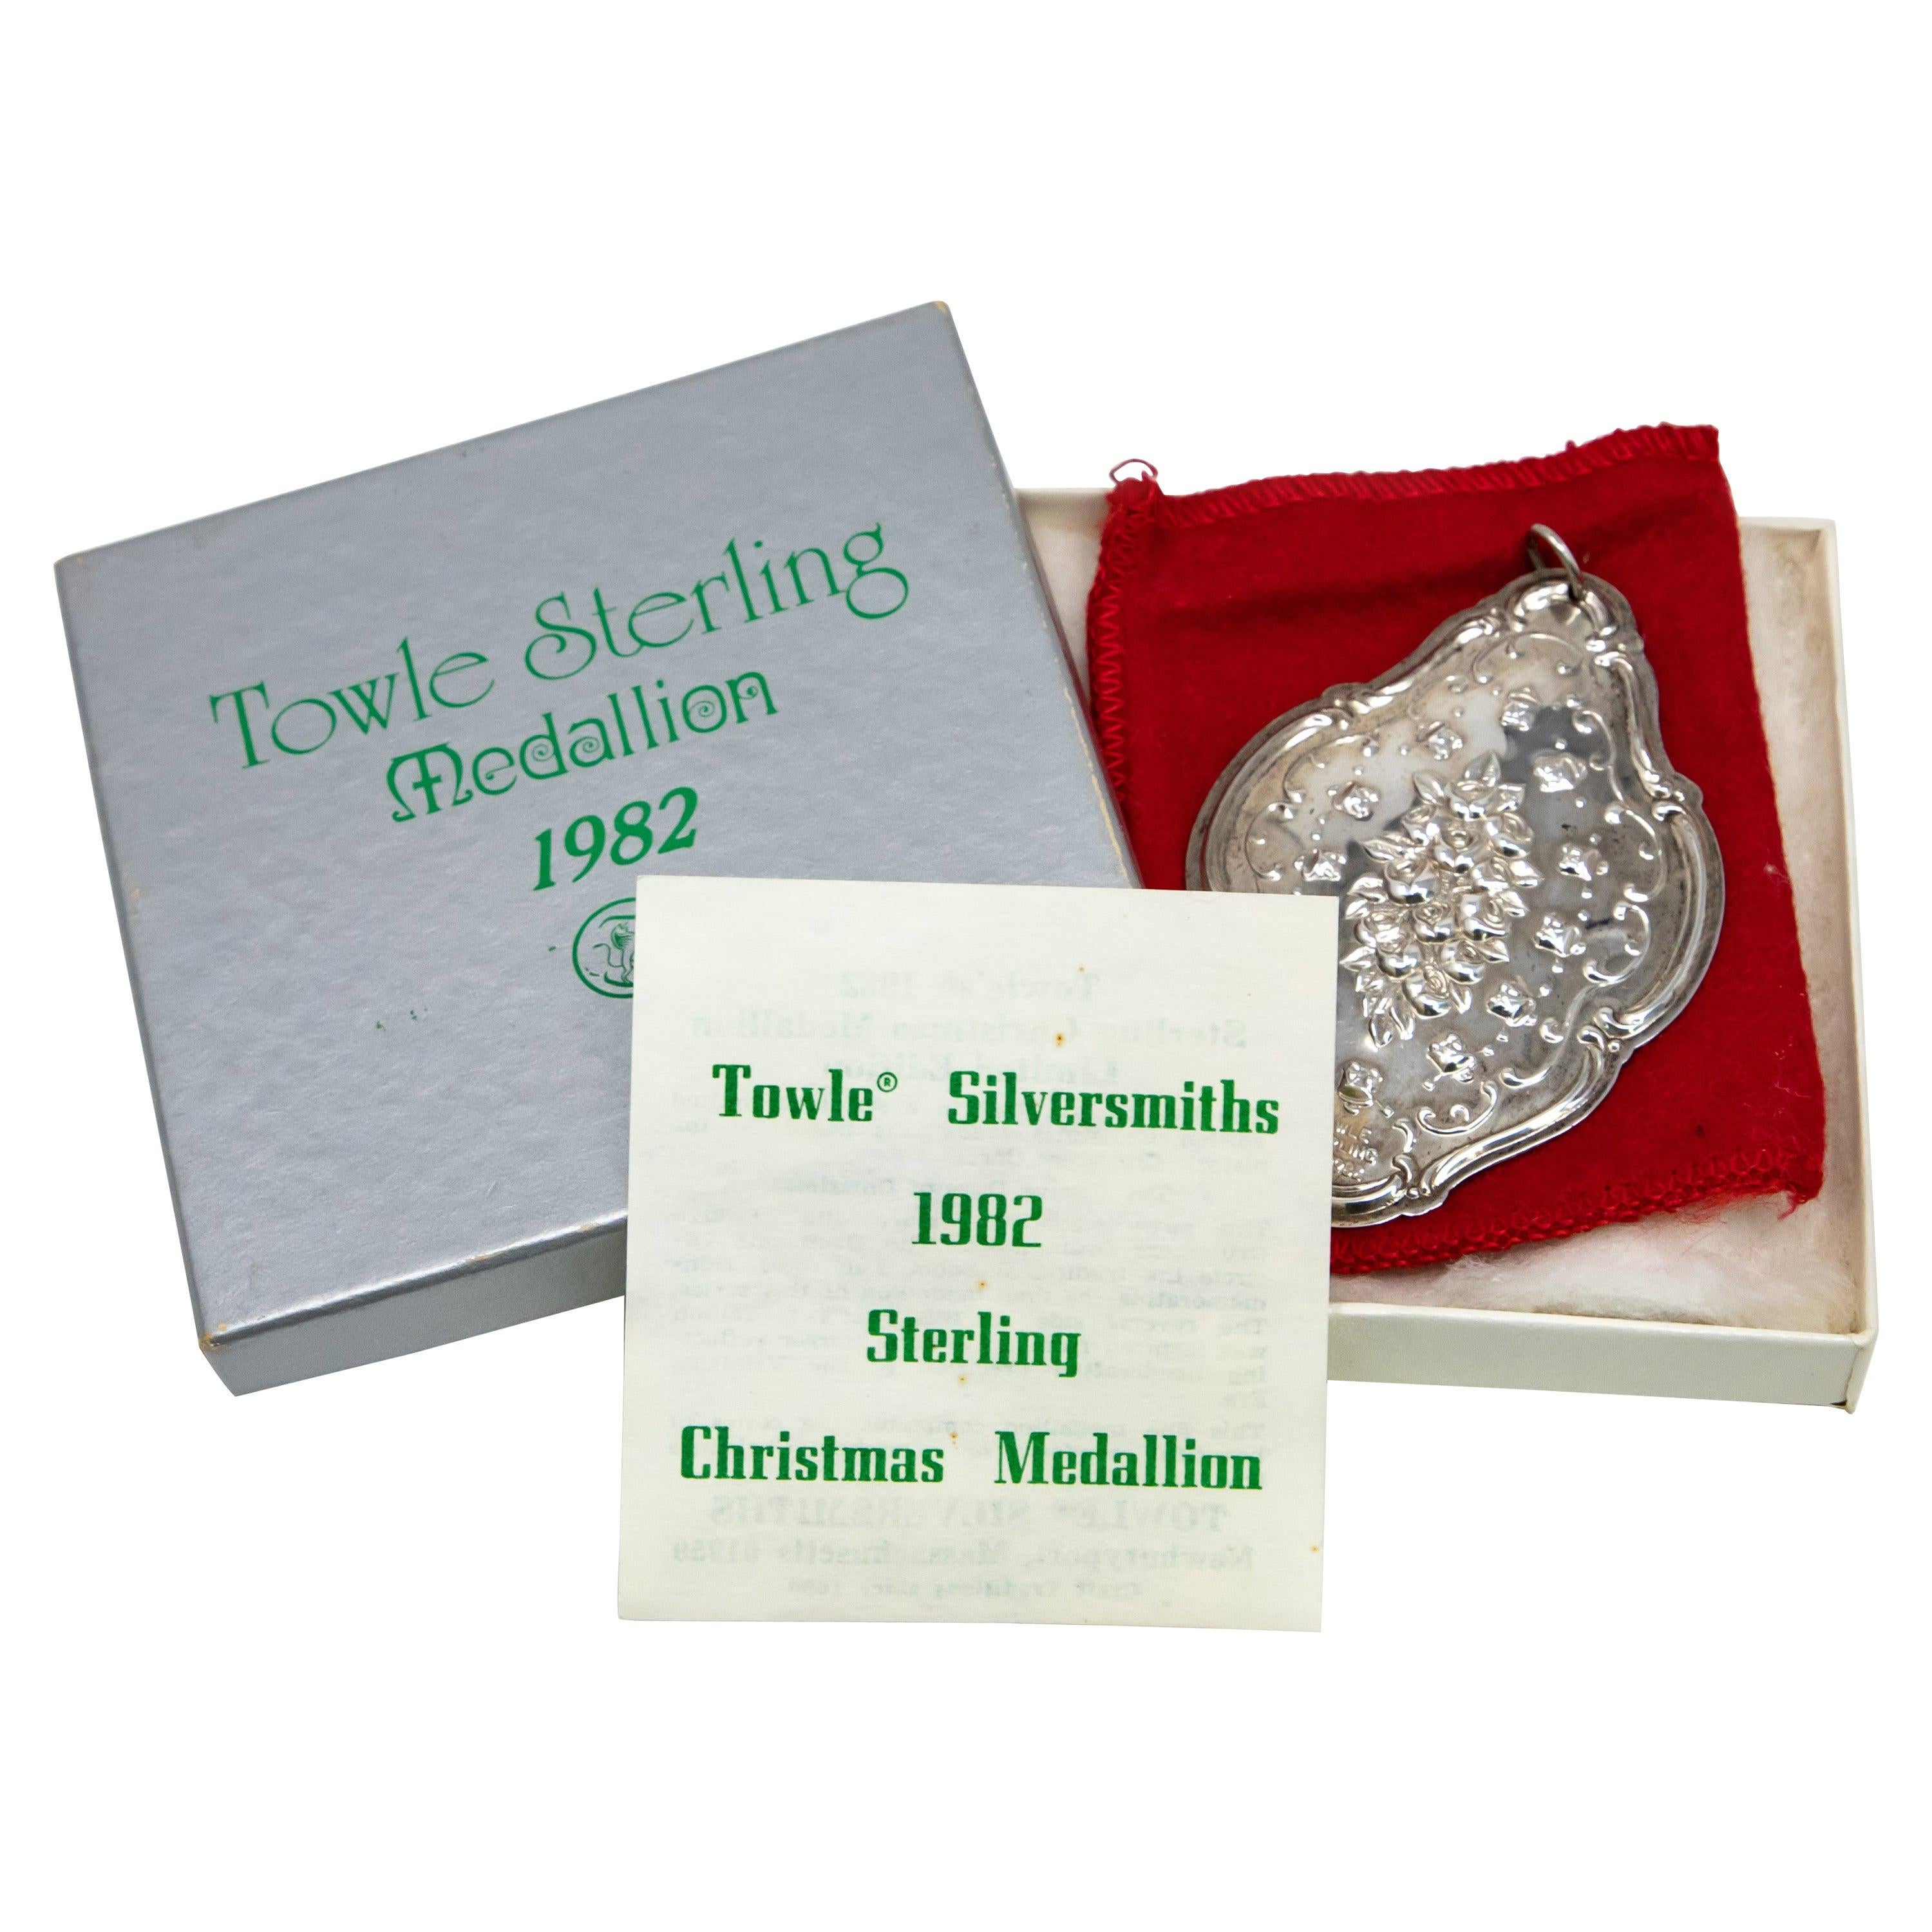 Towle Sterling Ornament "12 Drummers Drumming" with Box, 1982 For Sale